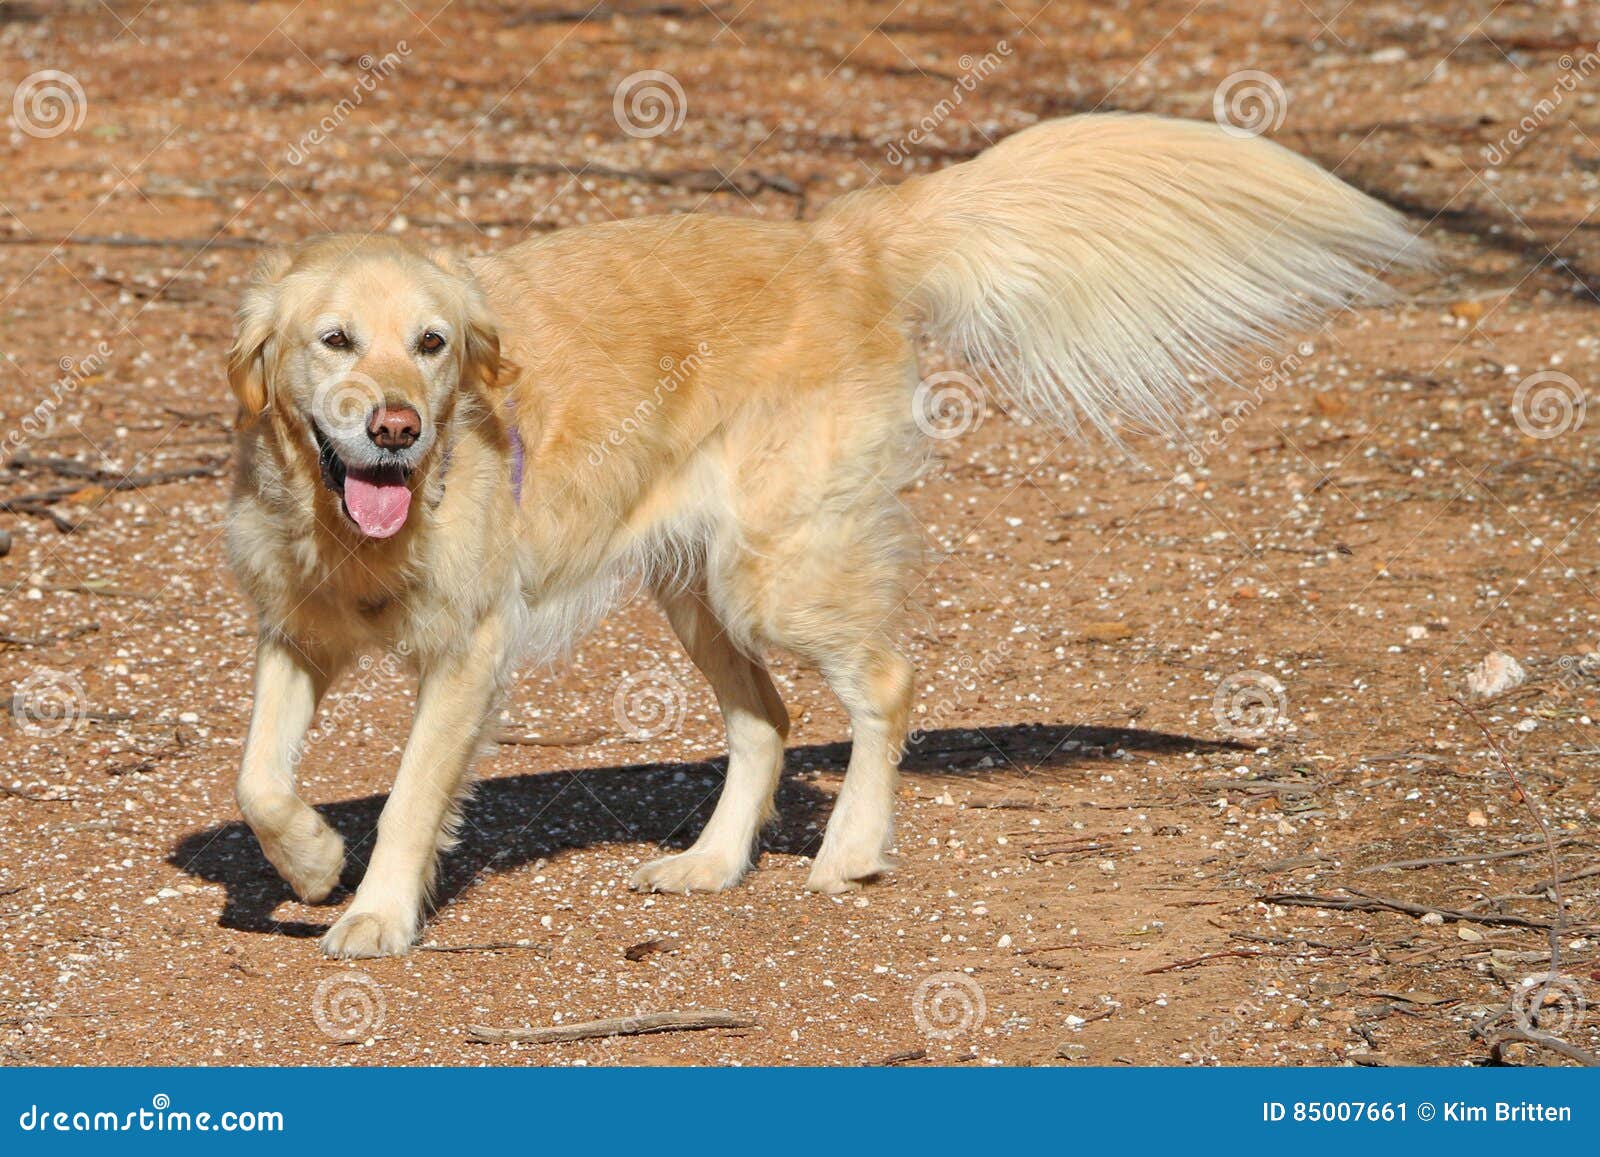 1 067 Golden Retriever Tail Photos Free Royalty Free Stock Photos From Dreamstime